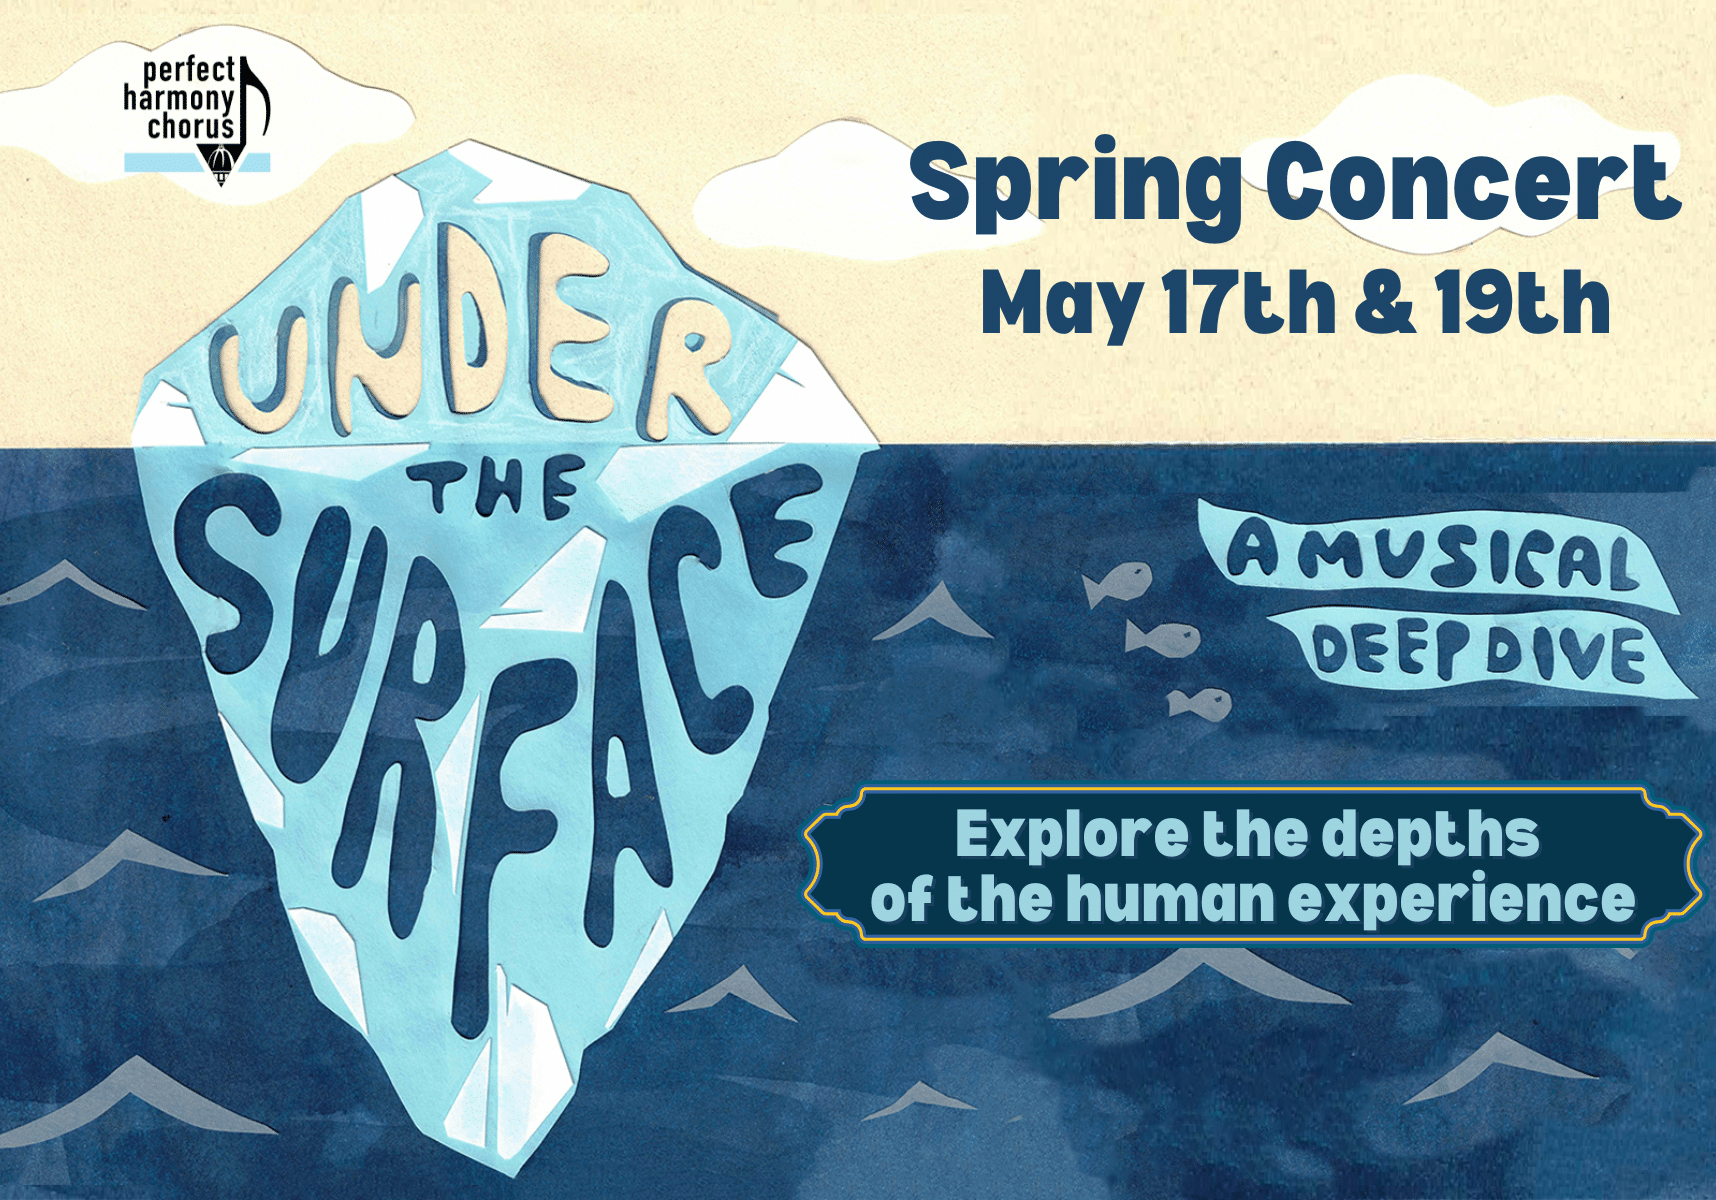 Image of a floating light blue iceberg in a deep blue ocean that says "Under the Surface, a musical deep dive. Explore the depths of the human experience, May 17th & 19th"